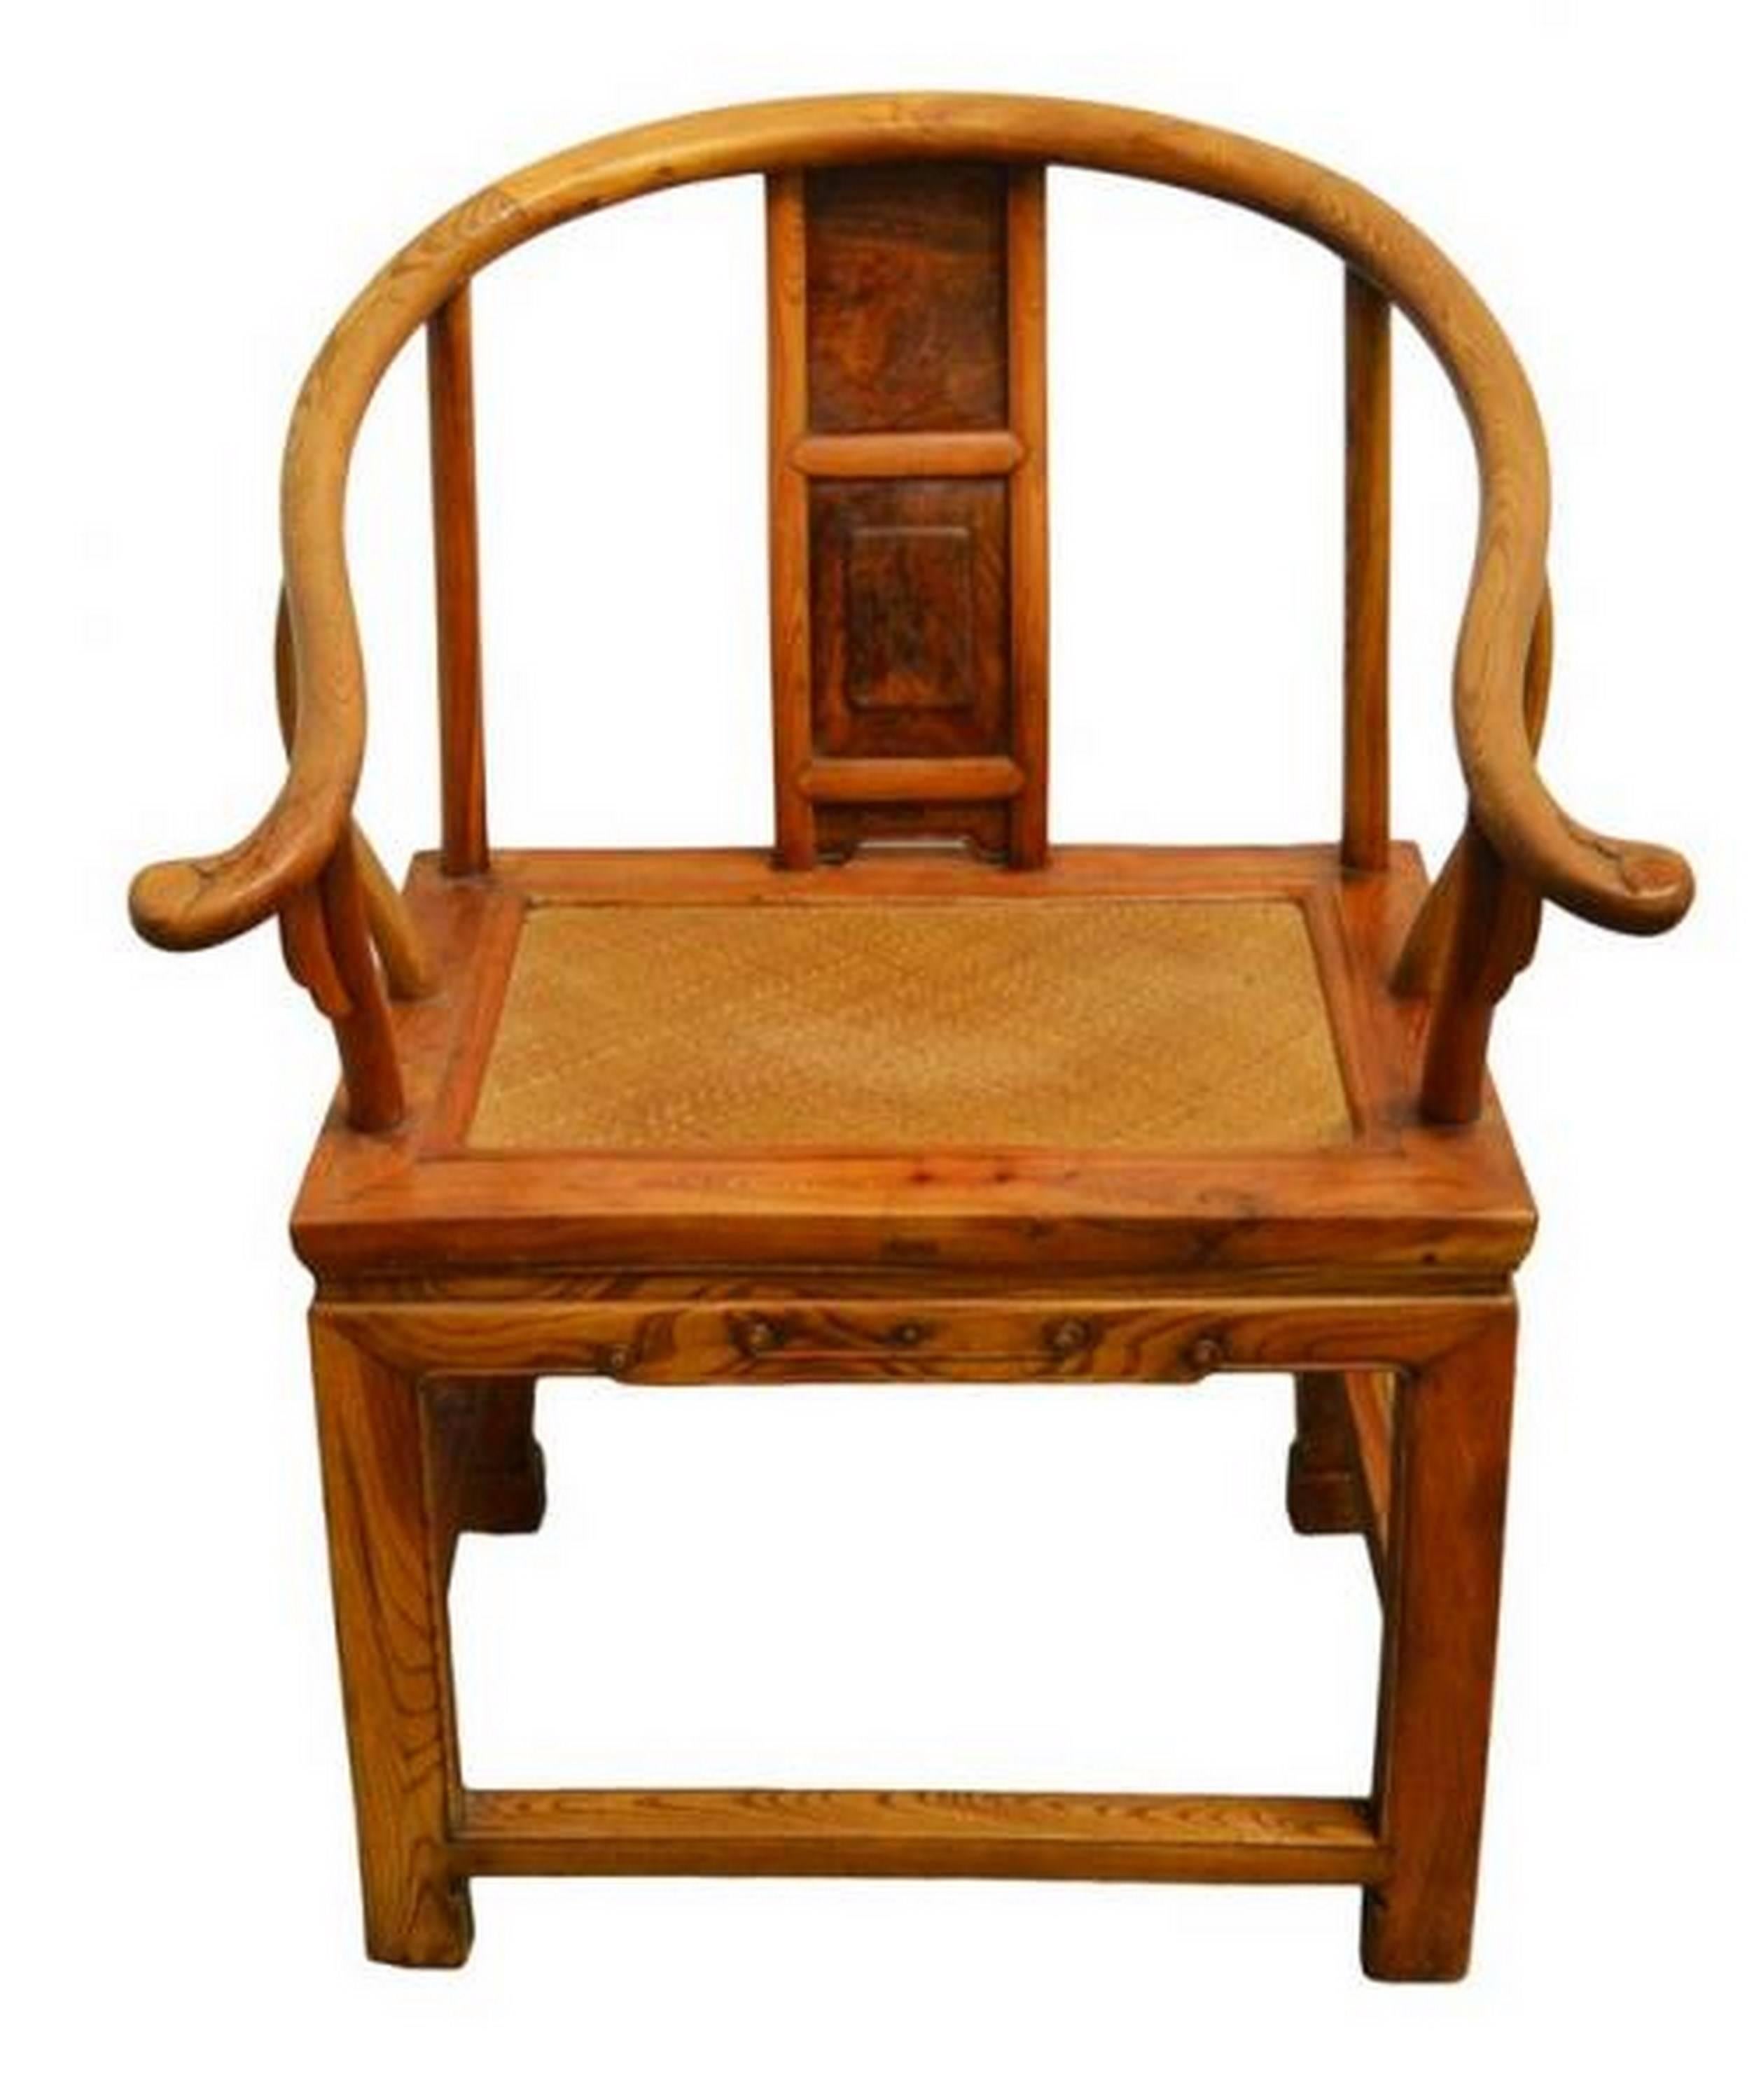 Carved 19th Century Chinese Light Brown Lacquered Horseshoe Back Chair with Rattan Seat